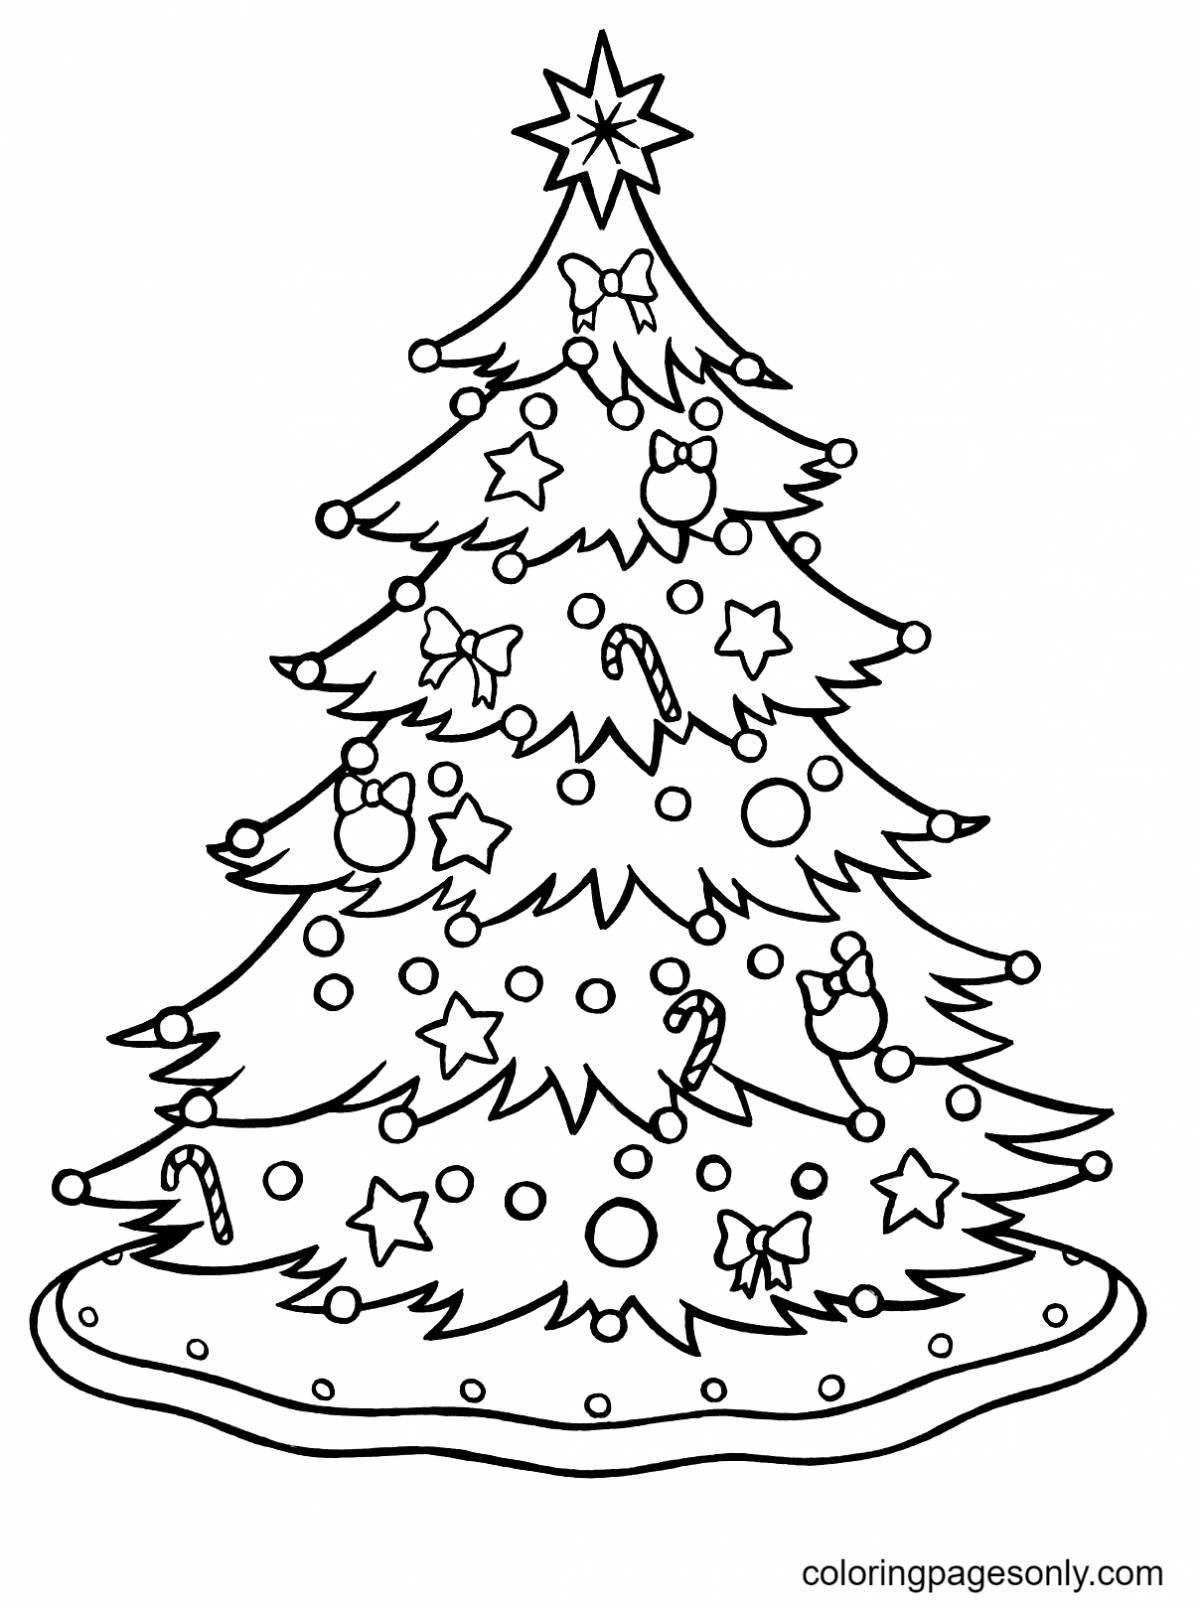 Children's Christmas tree coloring book